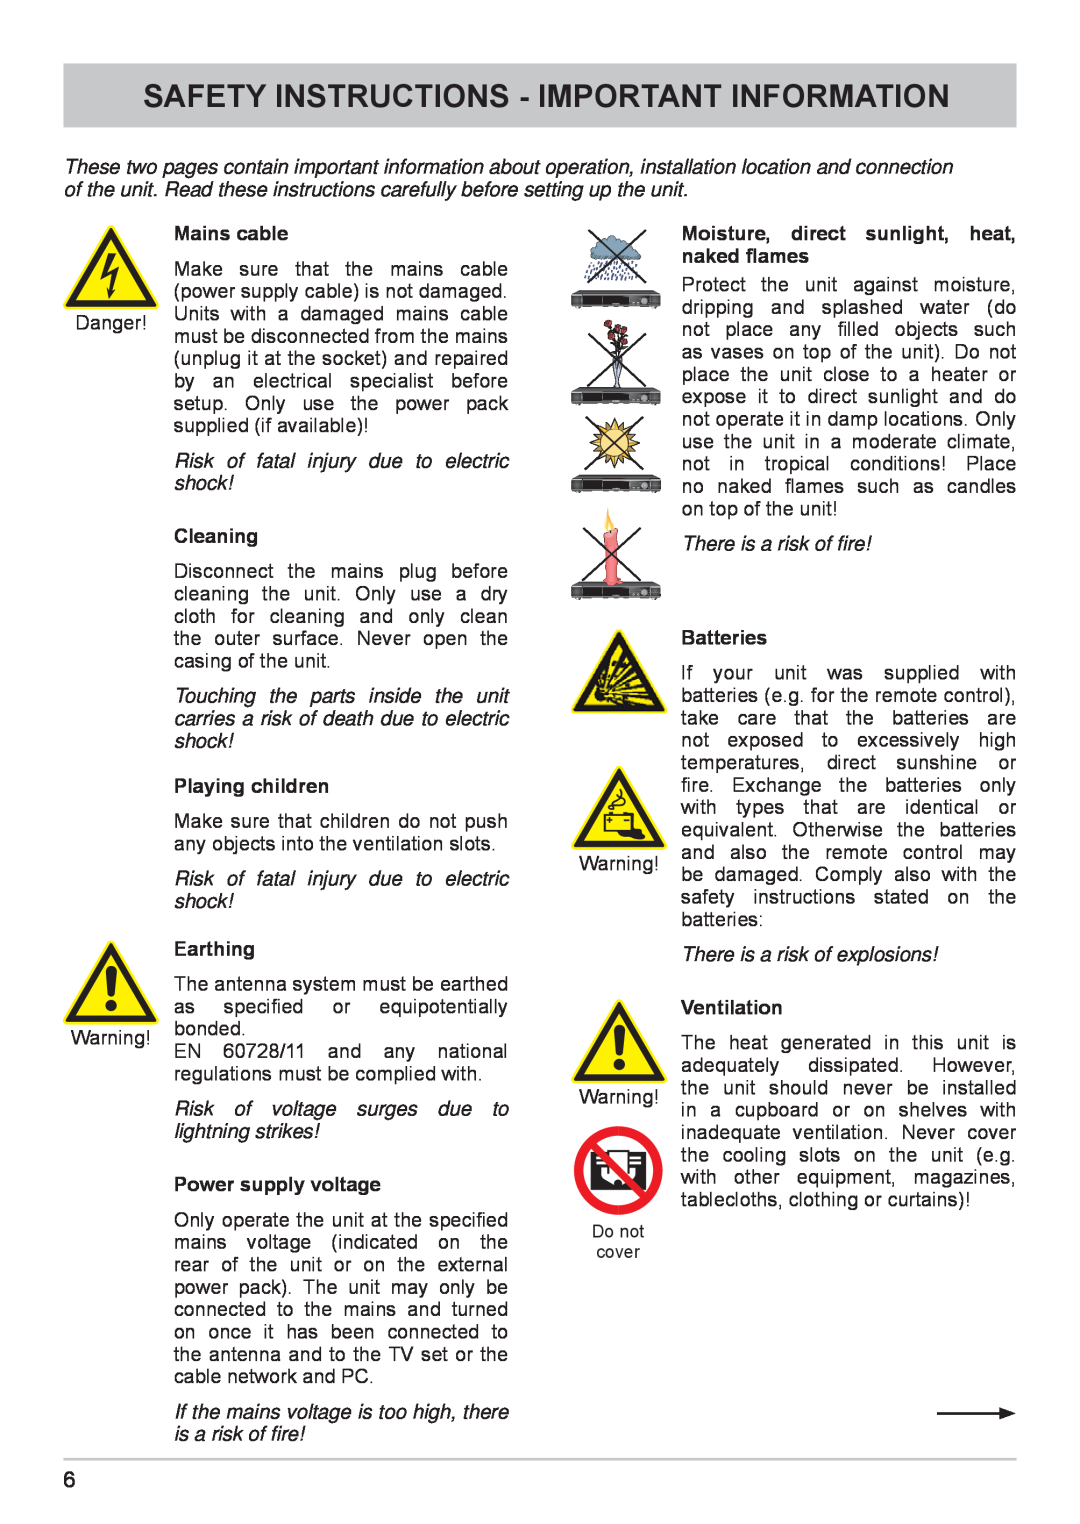 Kathrein UFC 662sw manual Safety Instructions - Important Information, Risk of fatal injury due to electric shock 